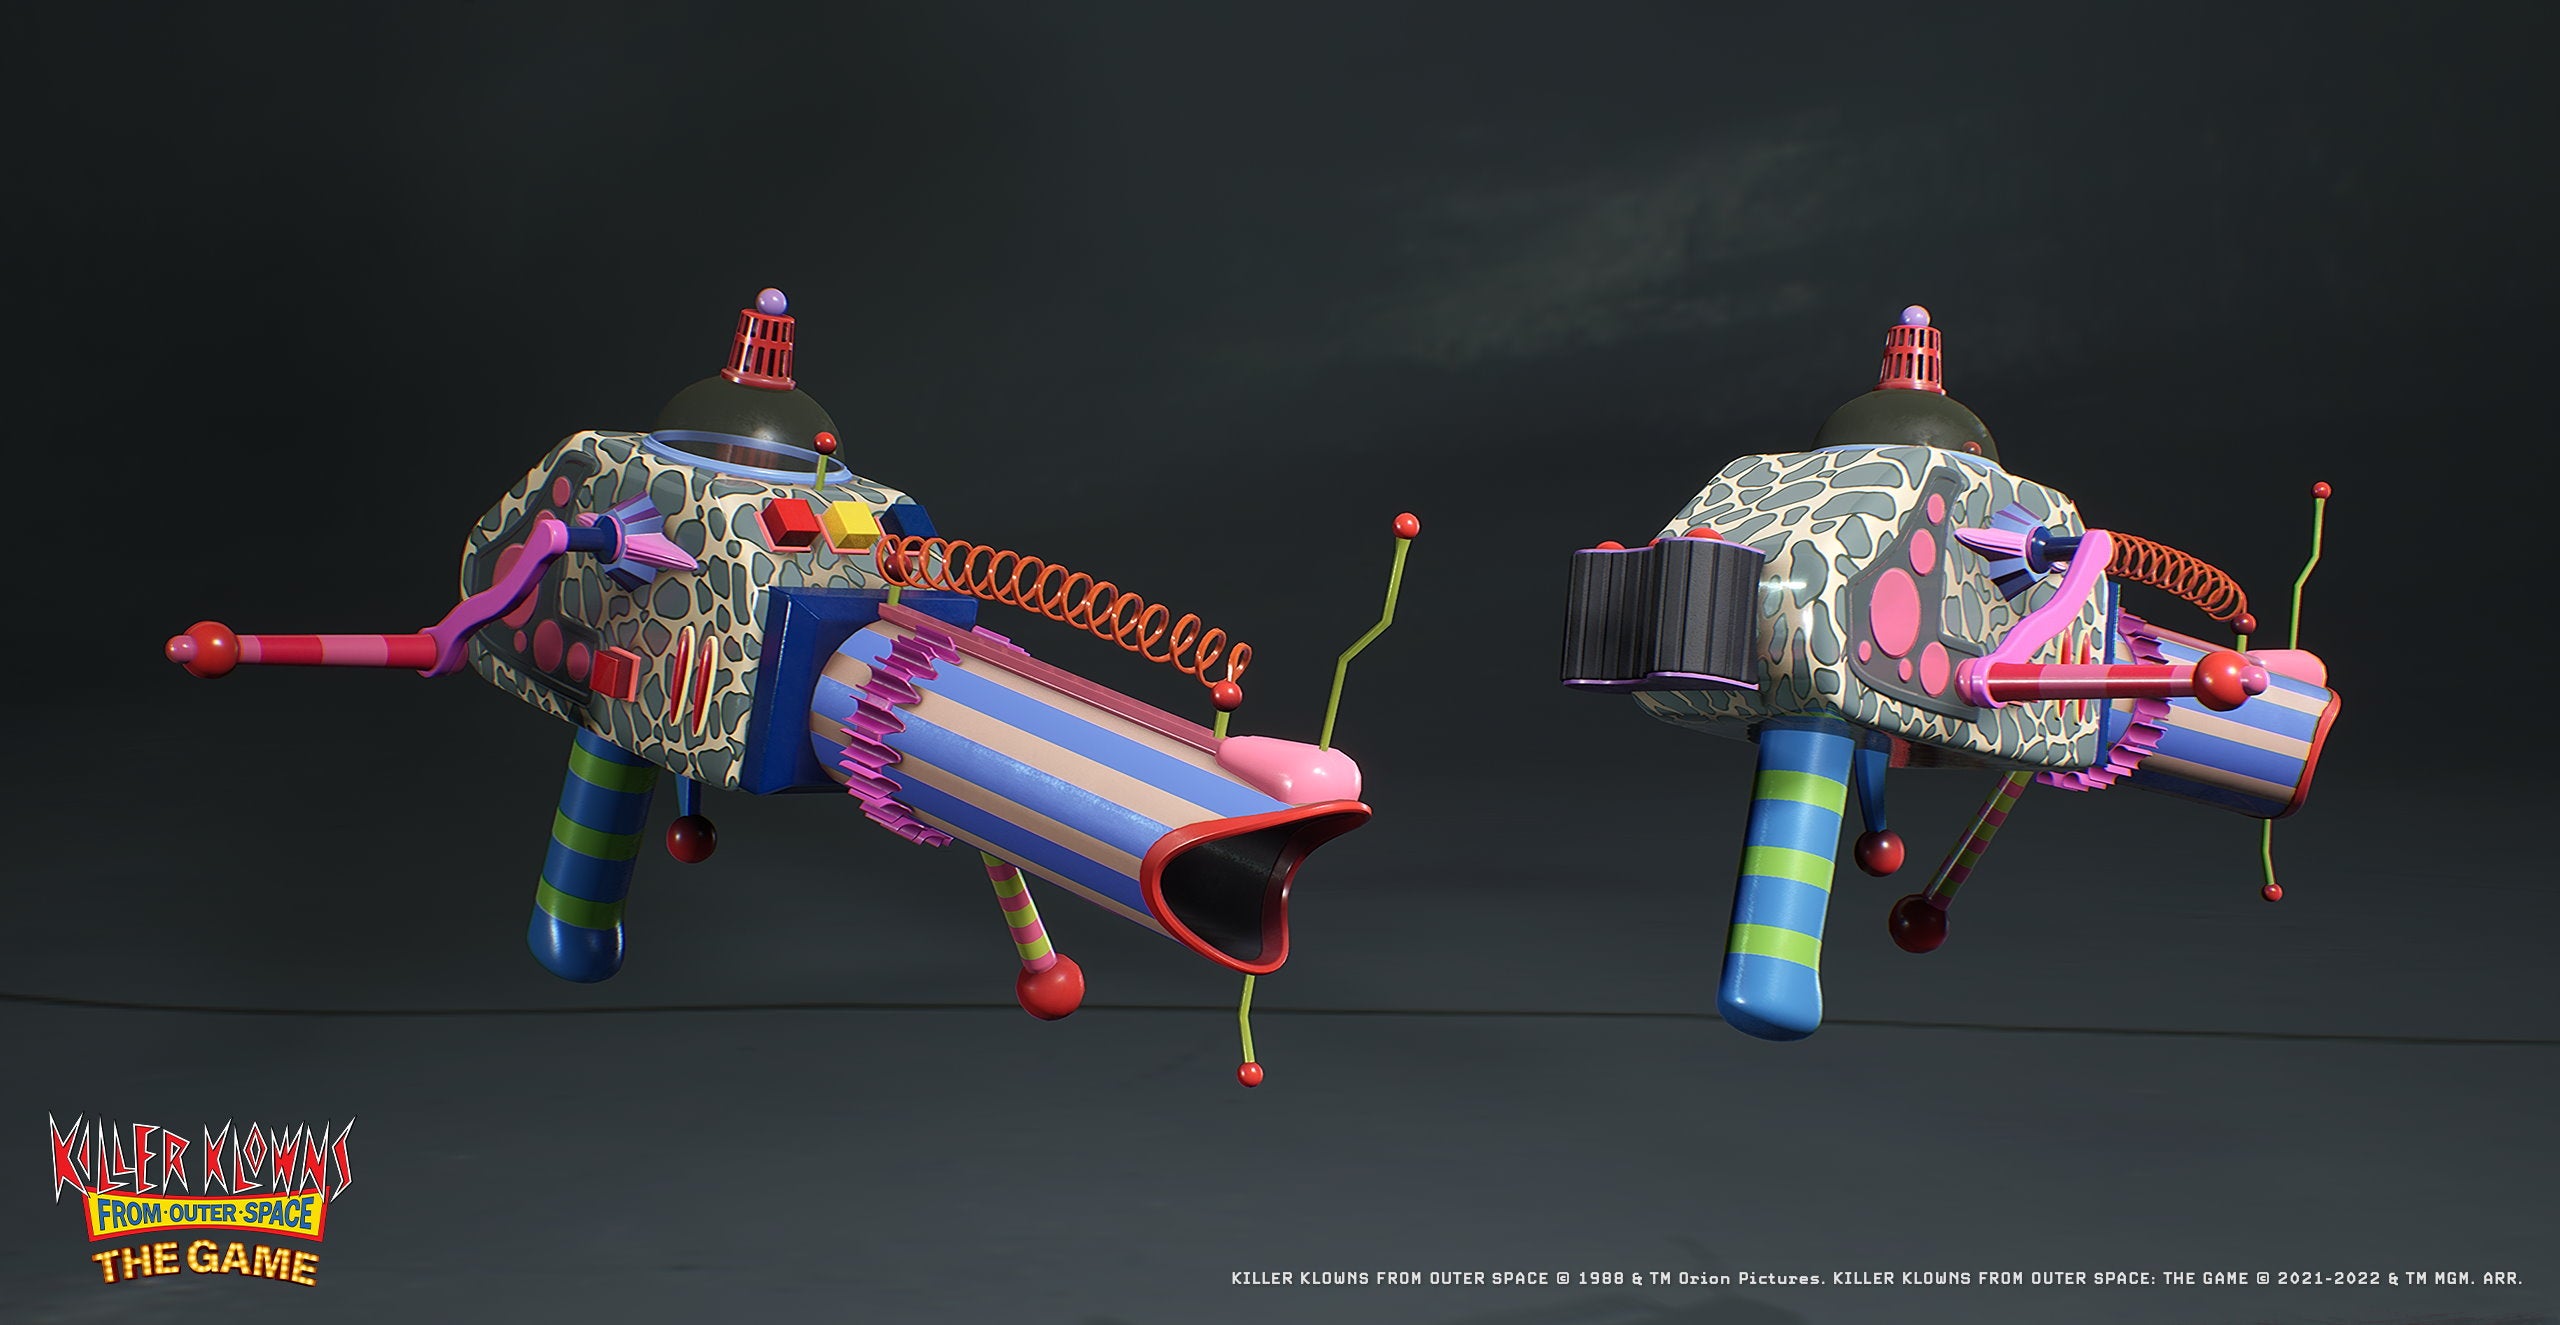 Bazooka rifle concept art from Killer Klowns From Outer Space: The Game